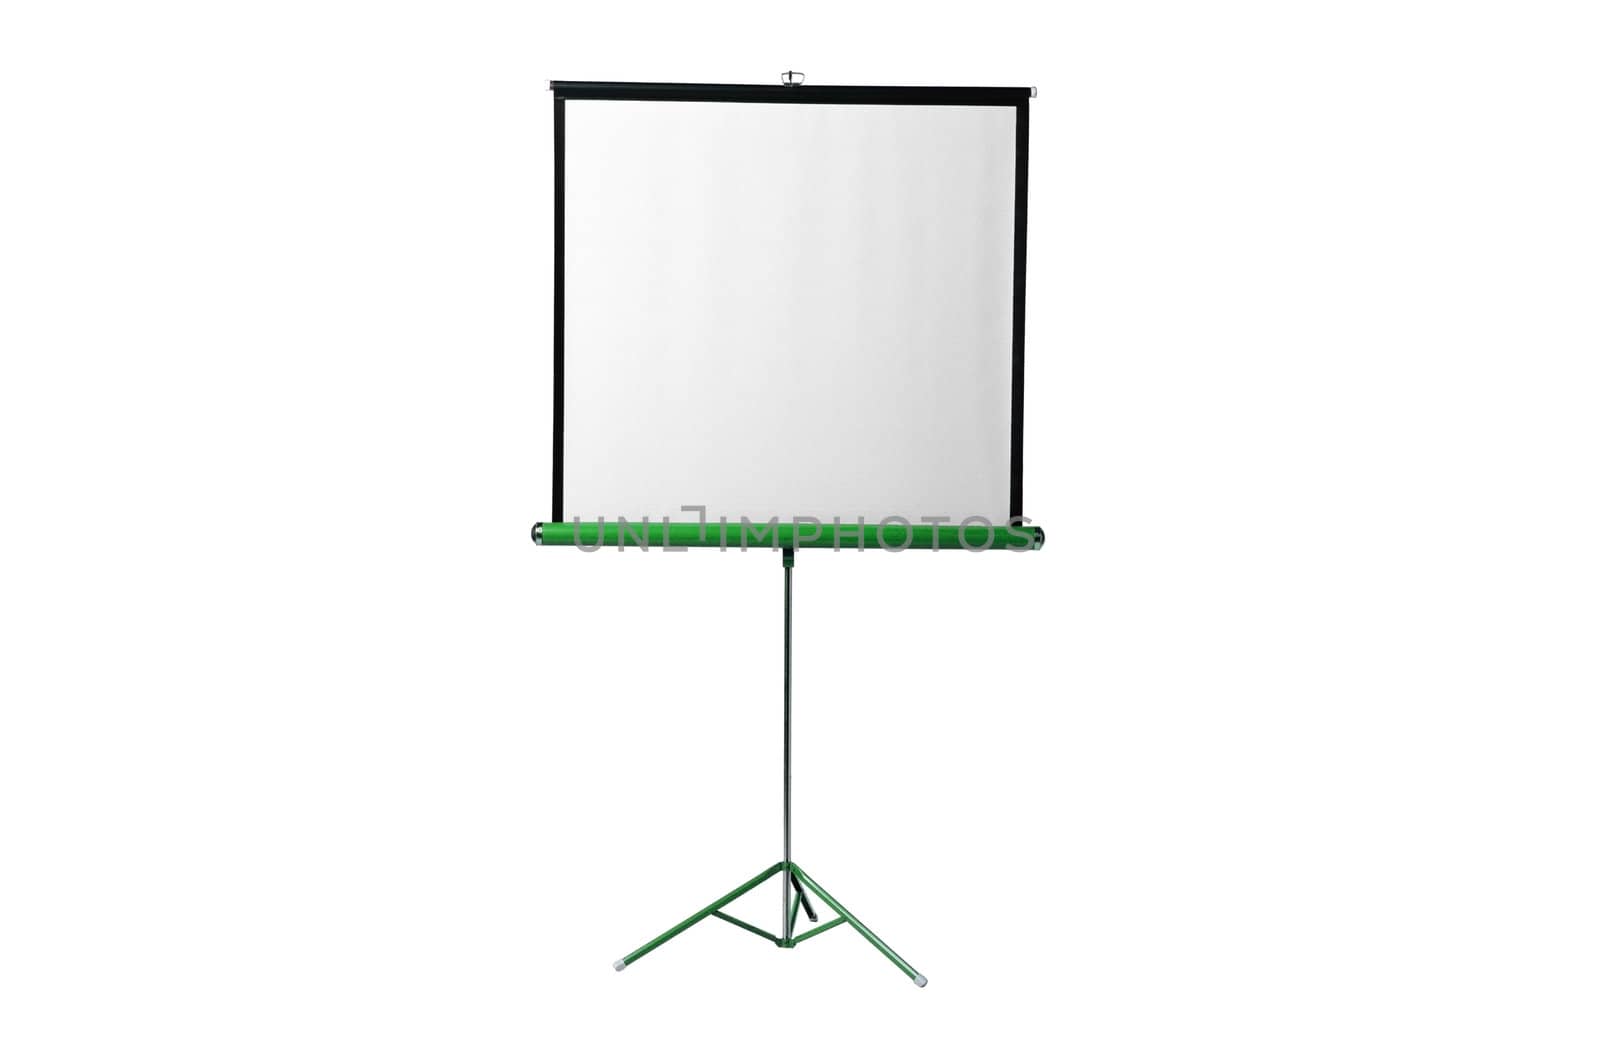 Flip Chart isolated on a white background